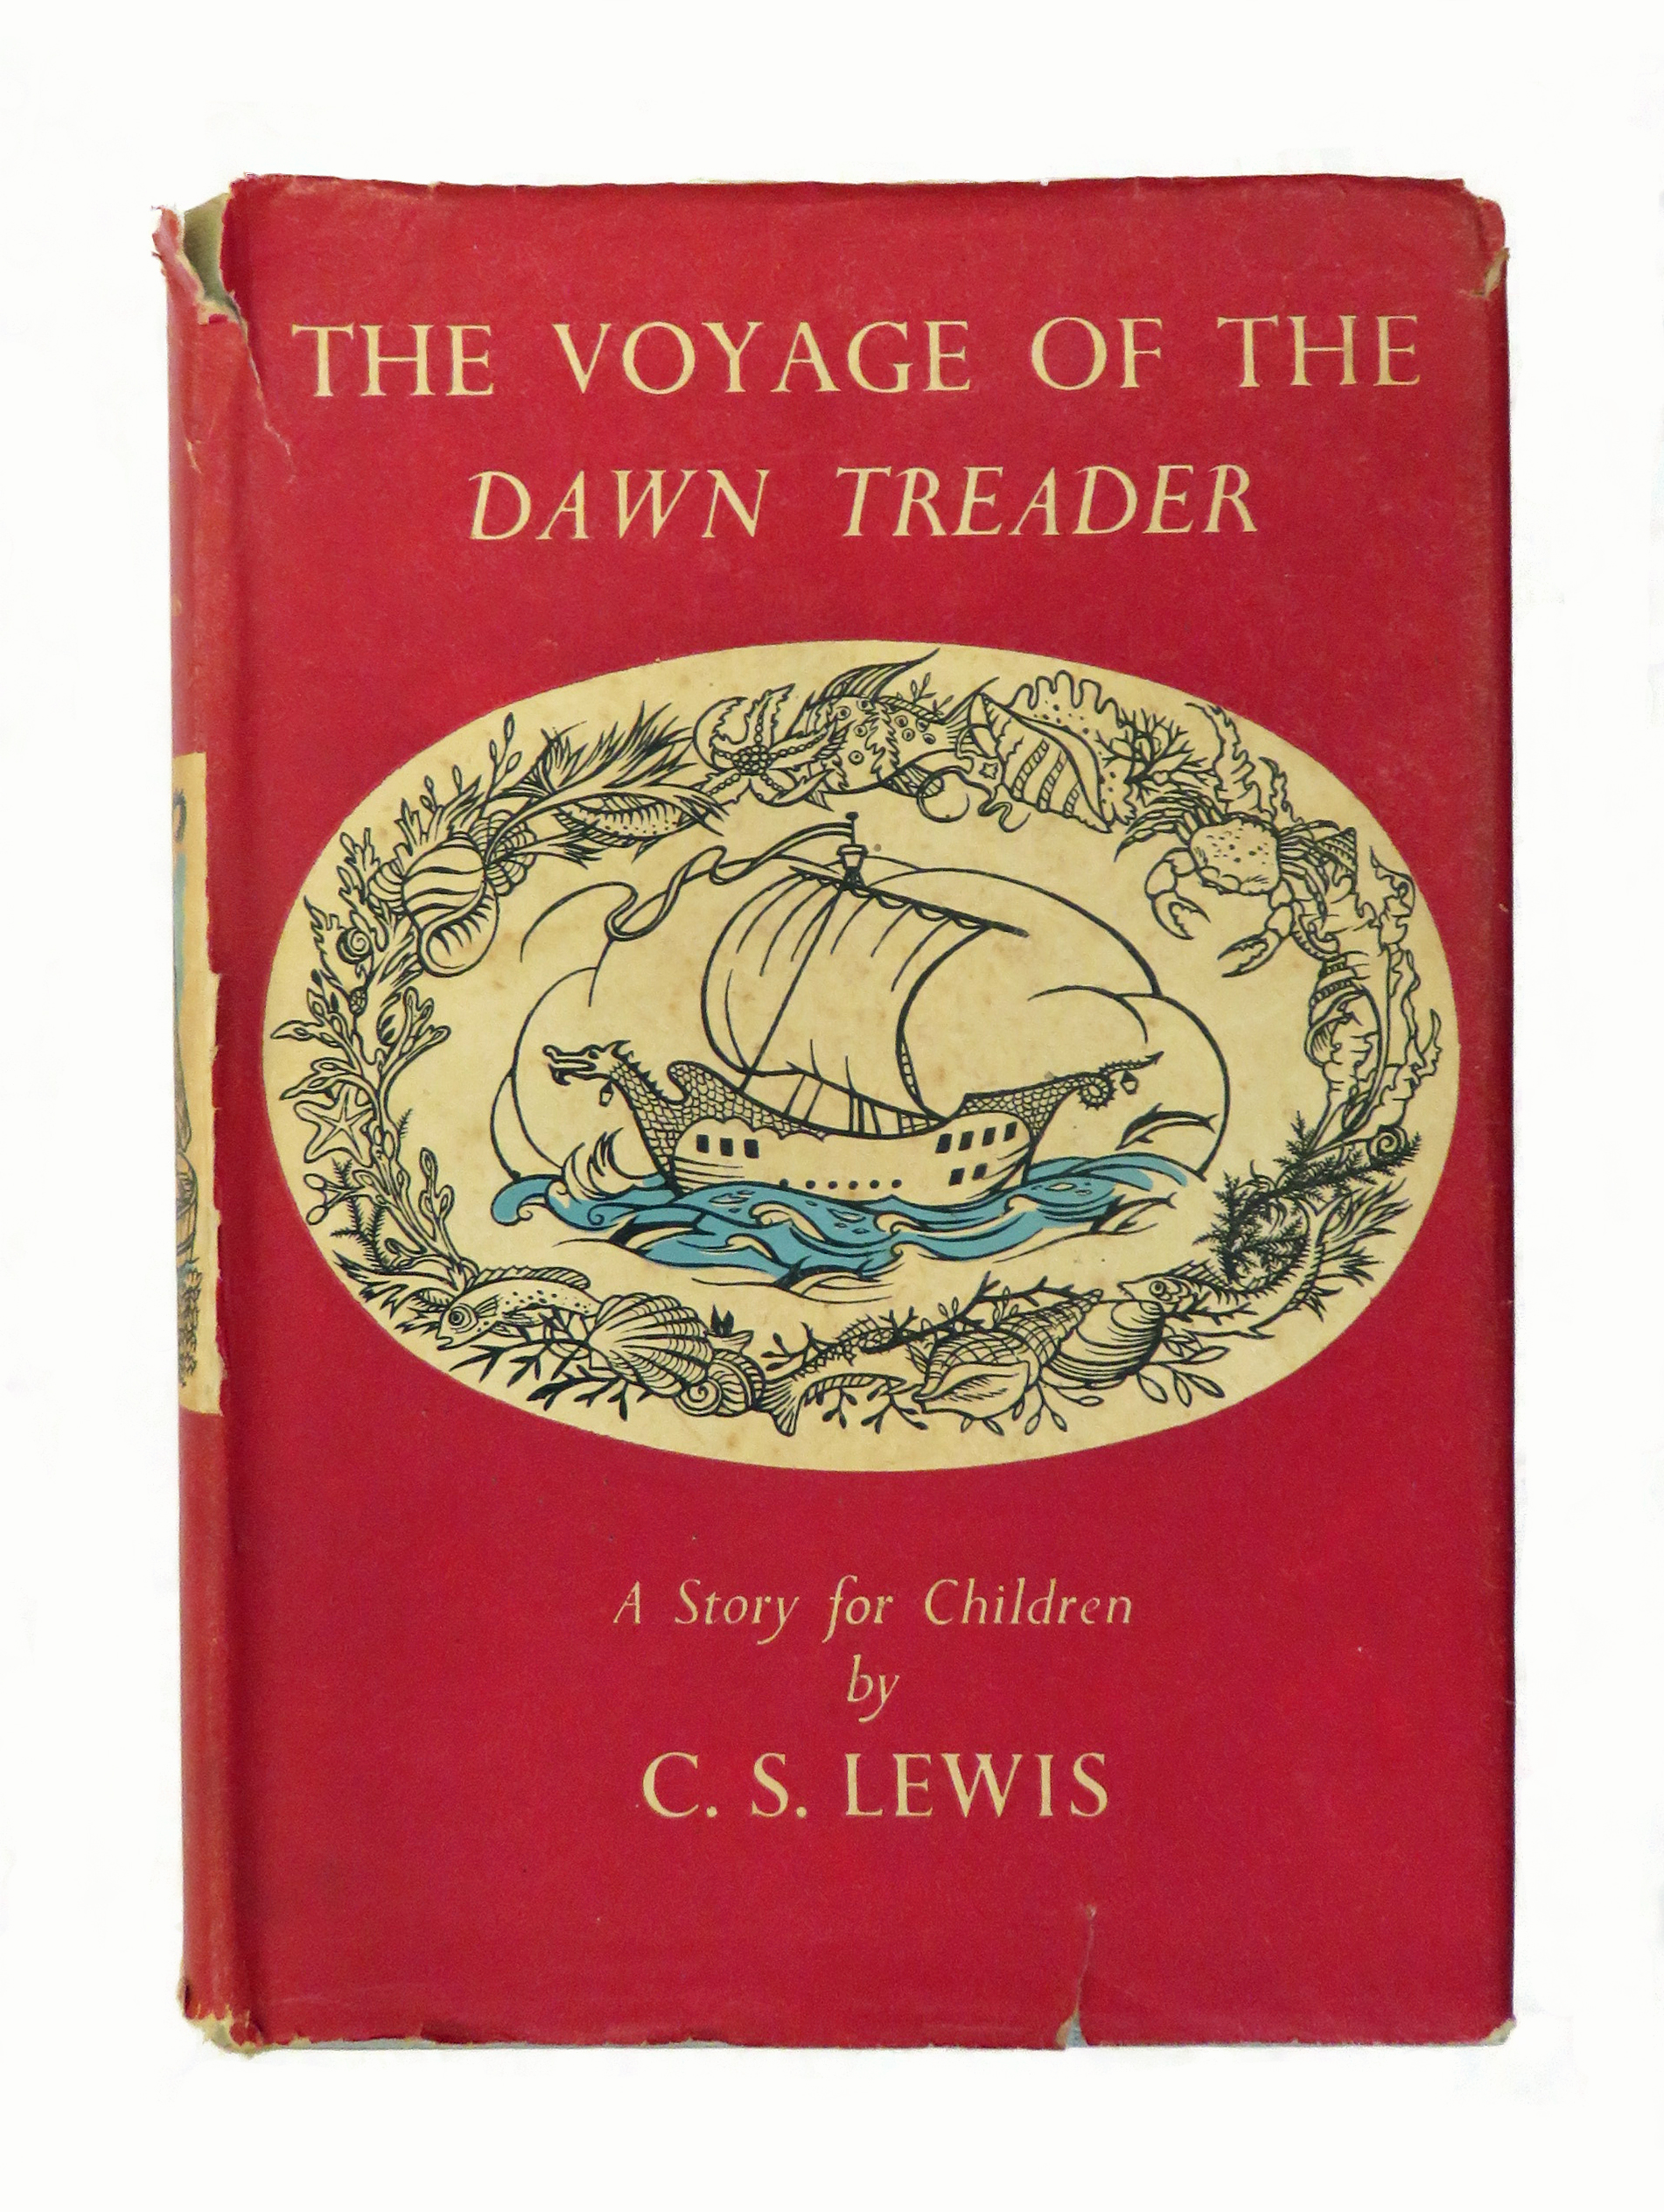 The Voyage of the Dawn Treader Narnia Series Book Three